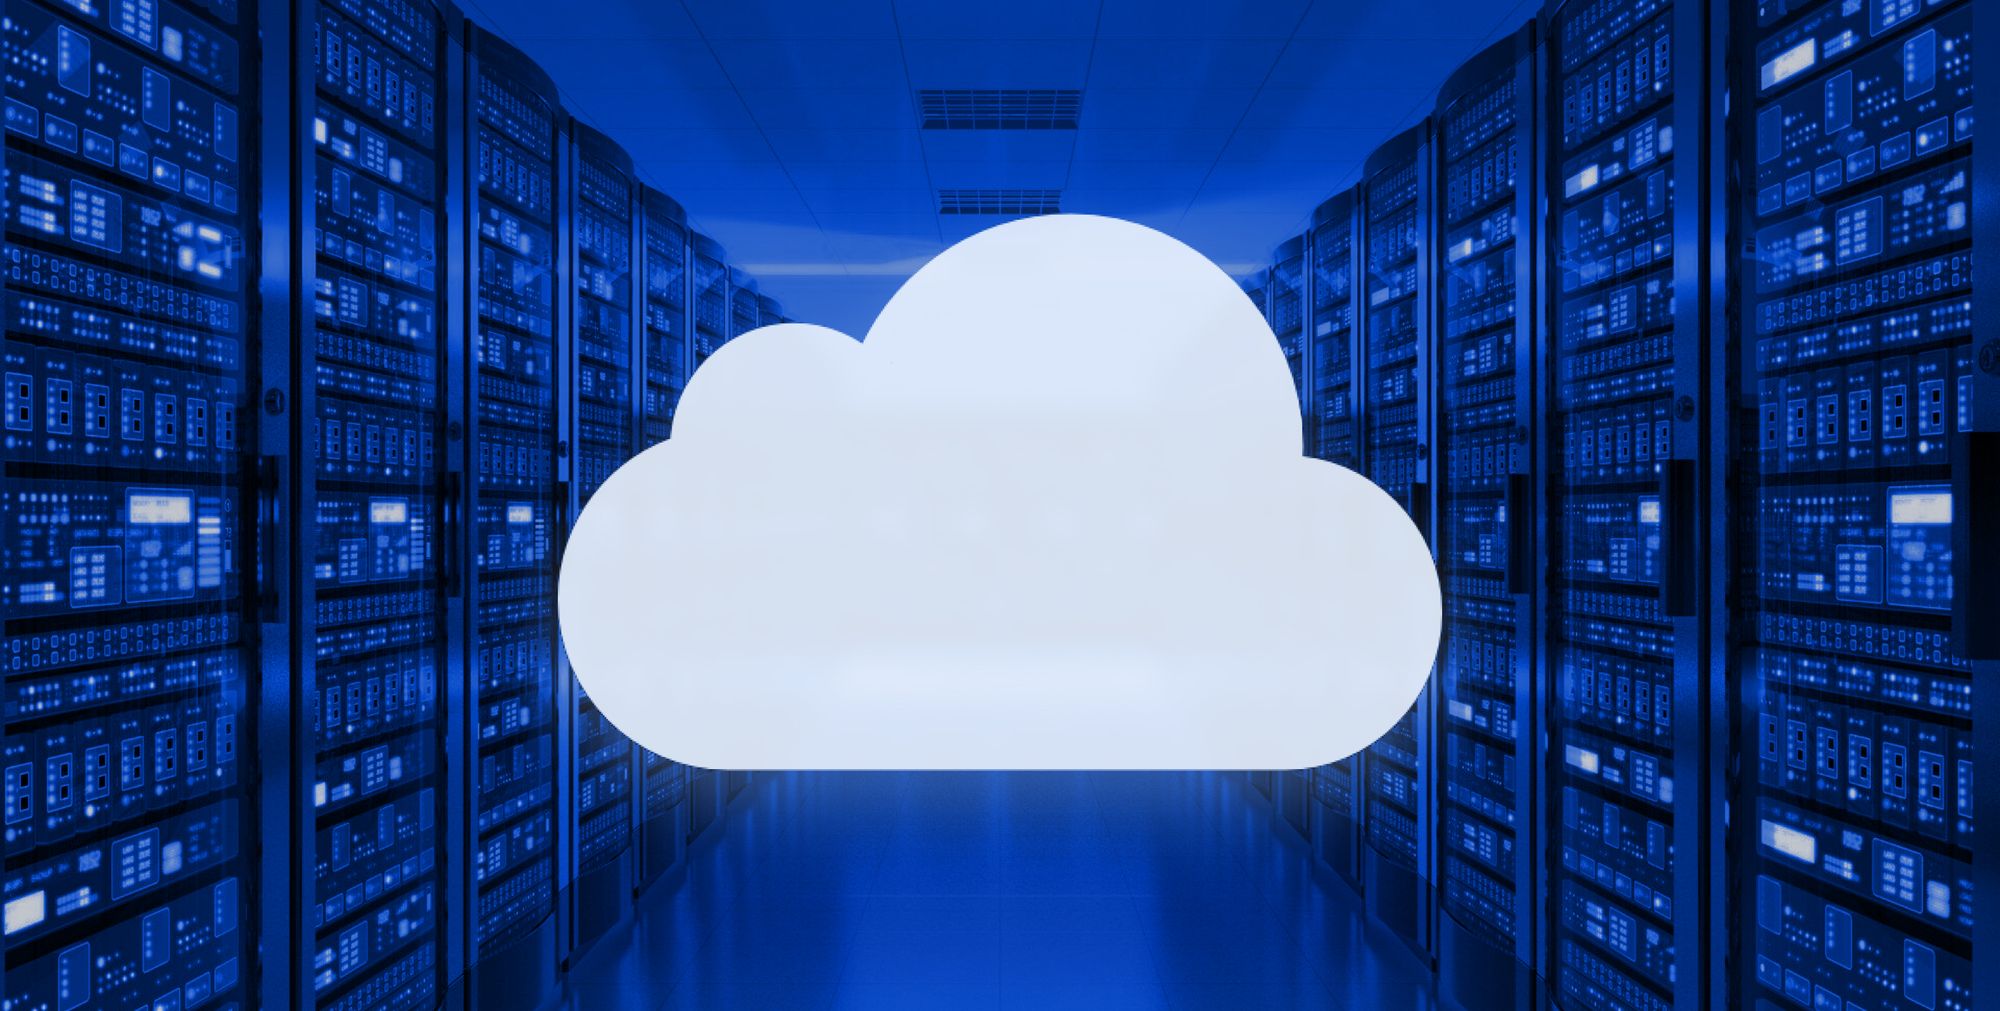 Best 7 Private Cloud Storage Solutions for 2022 You Should Choose From